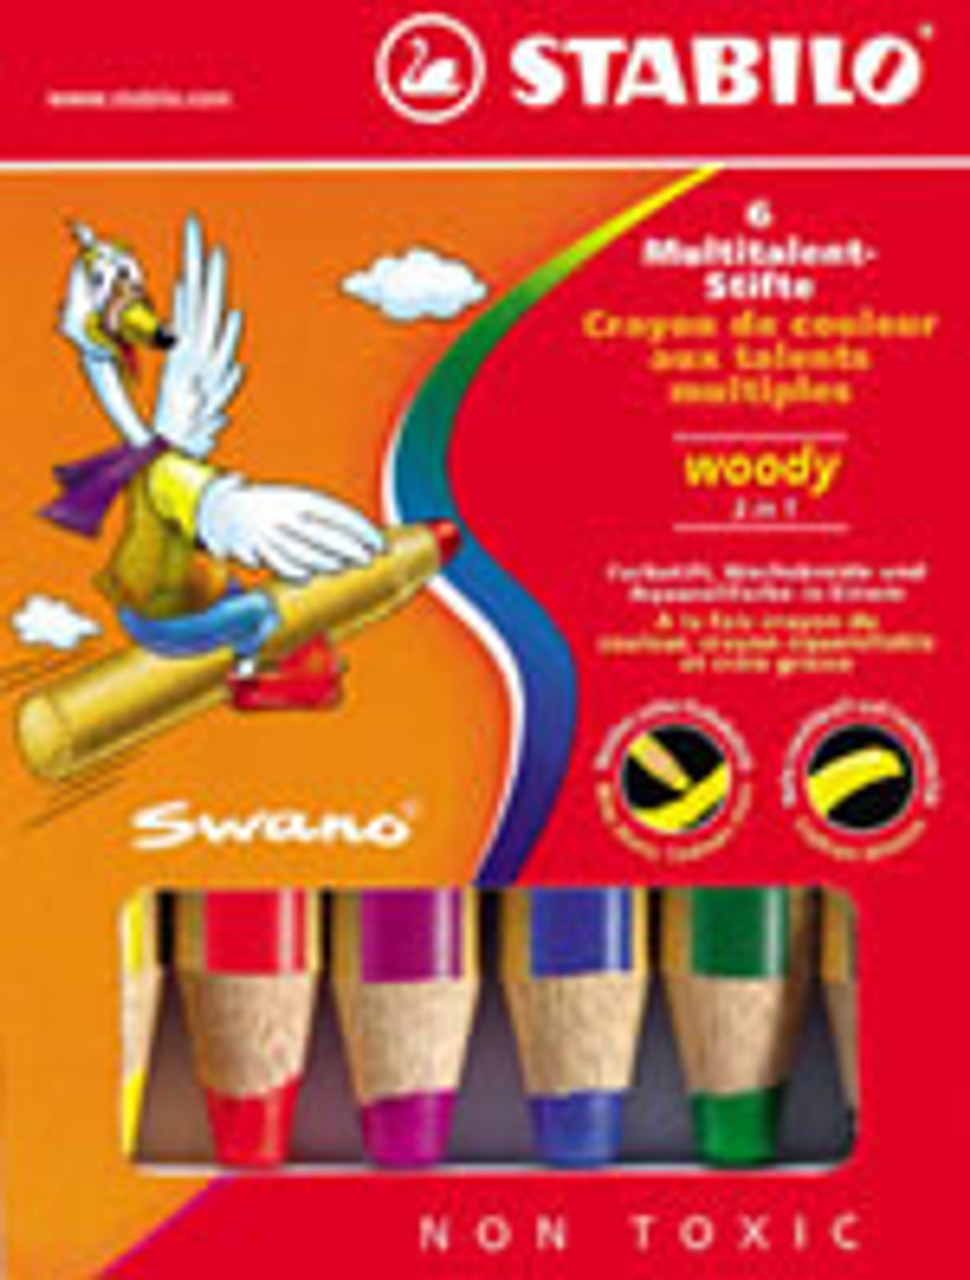 Stabilo Woody 6 Color + Sharpener - Wet Paint Artists' Materials and Framing